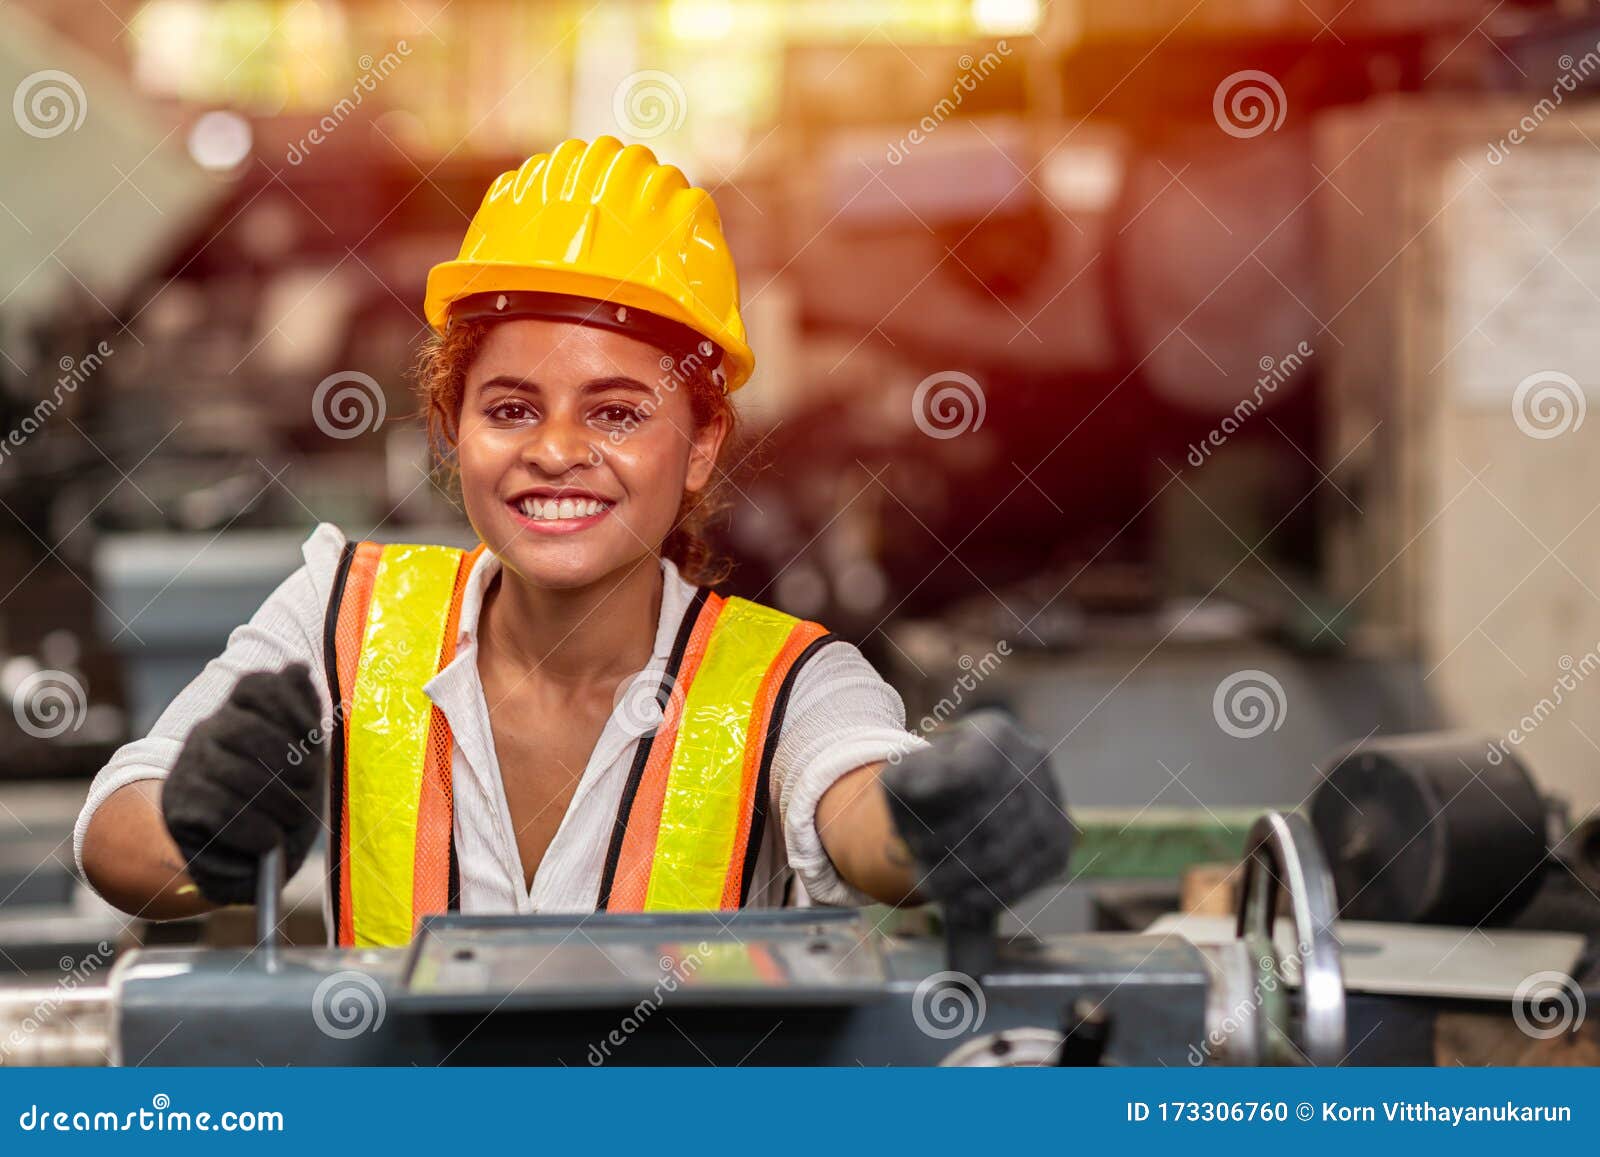 girl teen worker with safety helmet happy smiling working labor in industry factory with steel machine